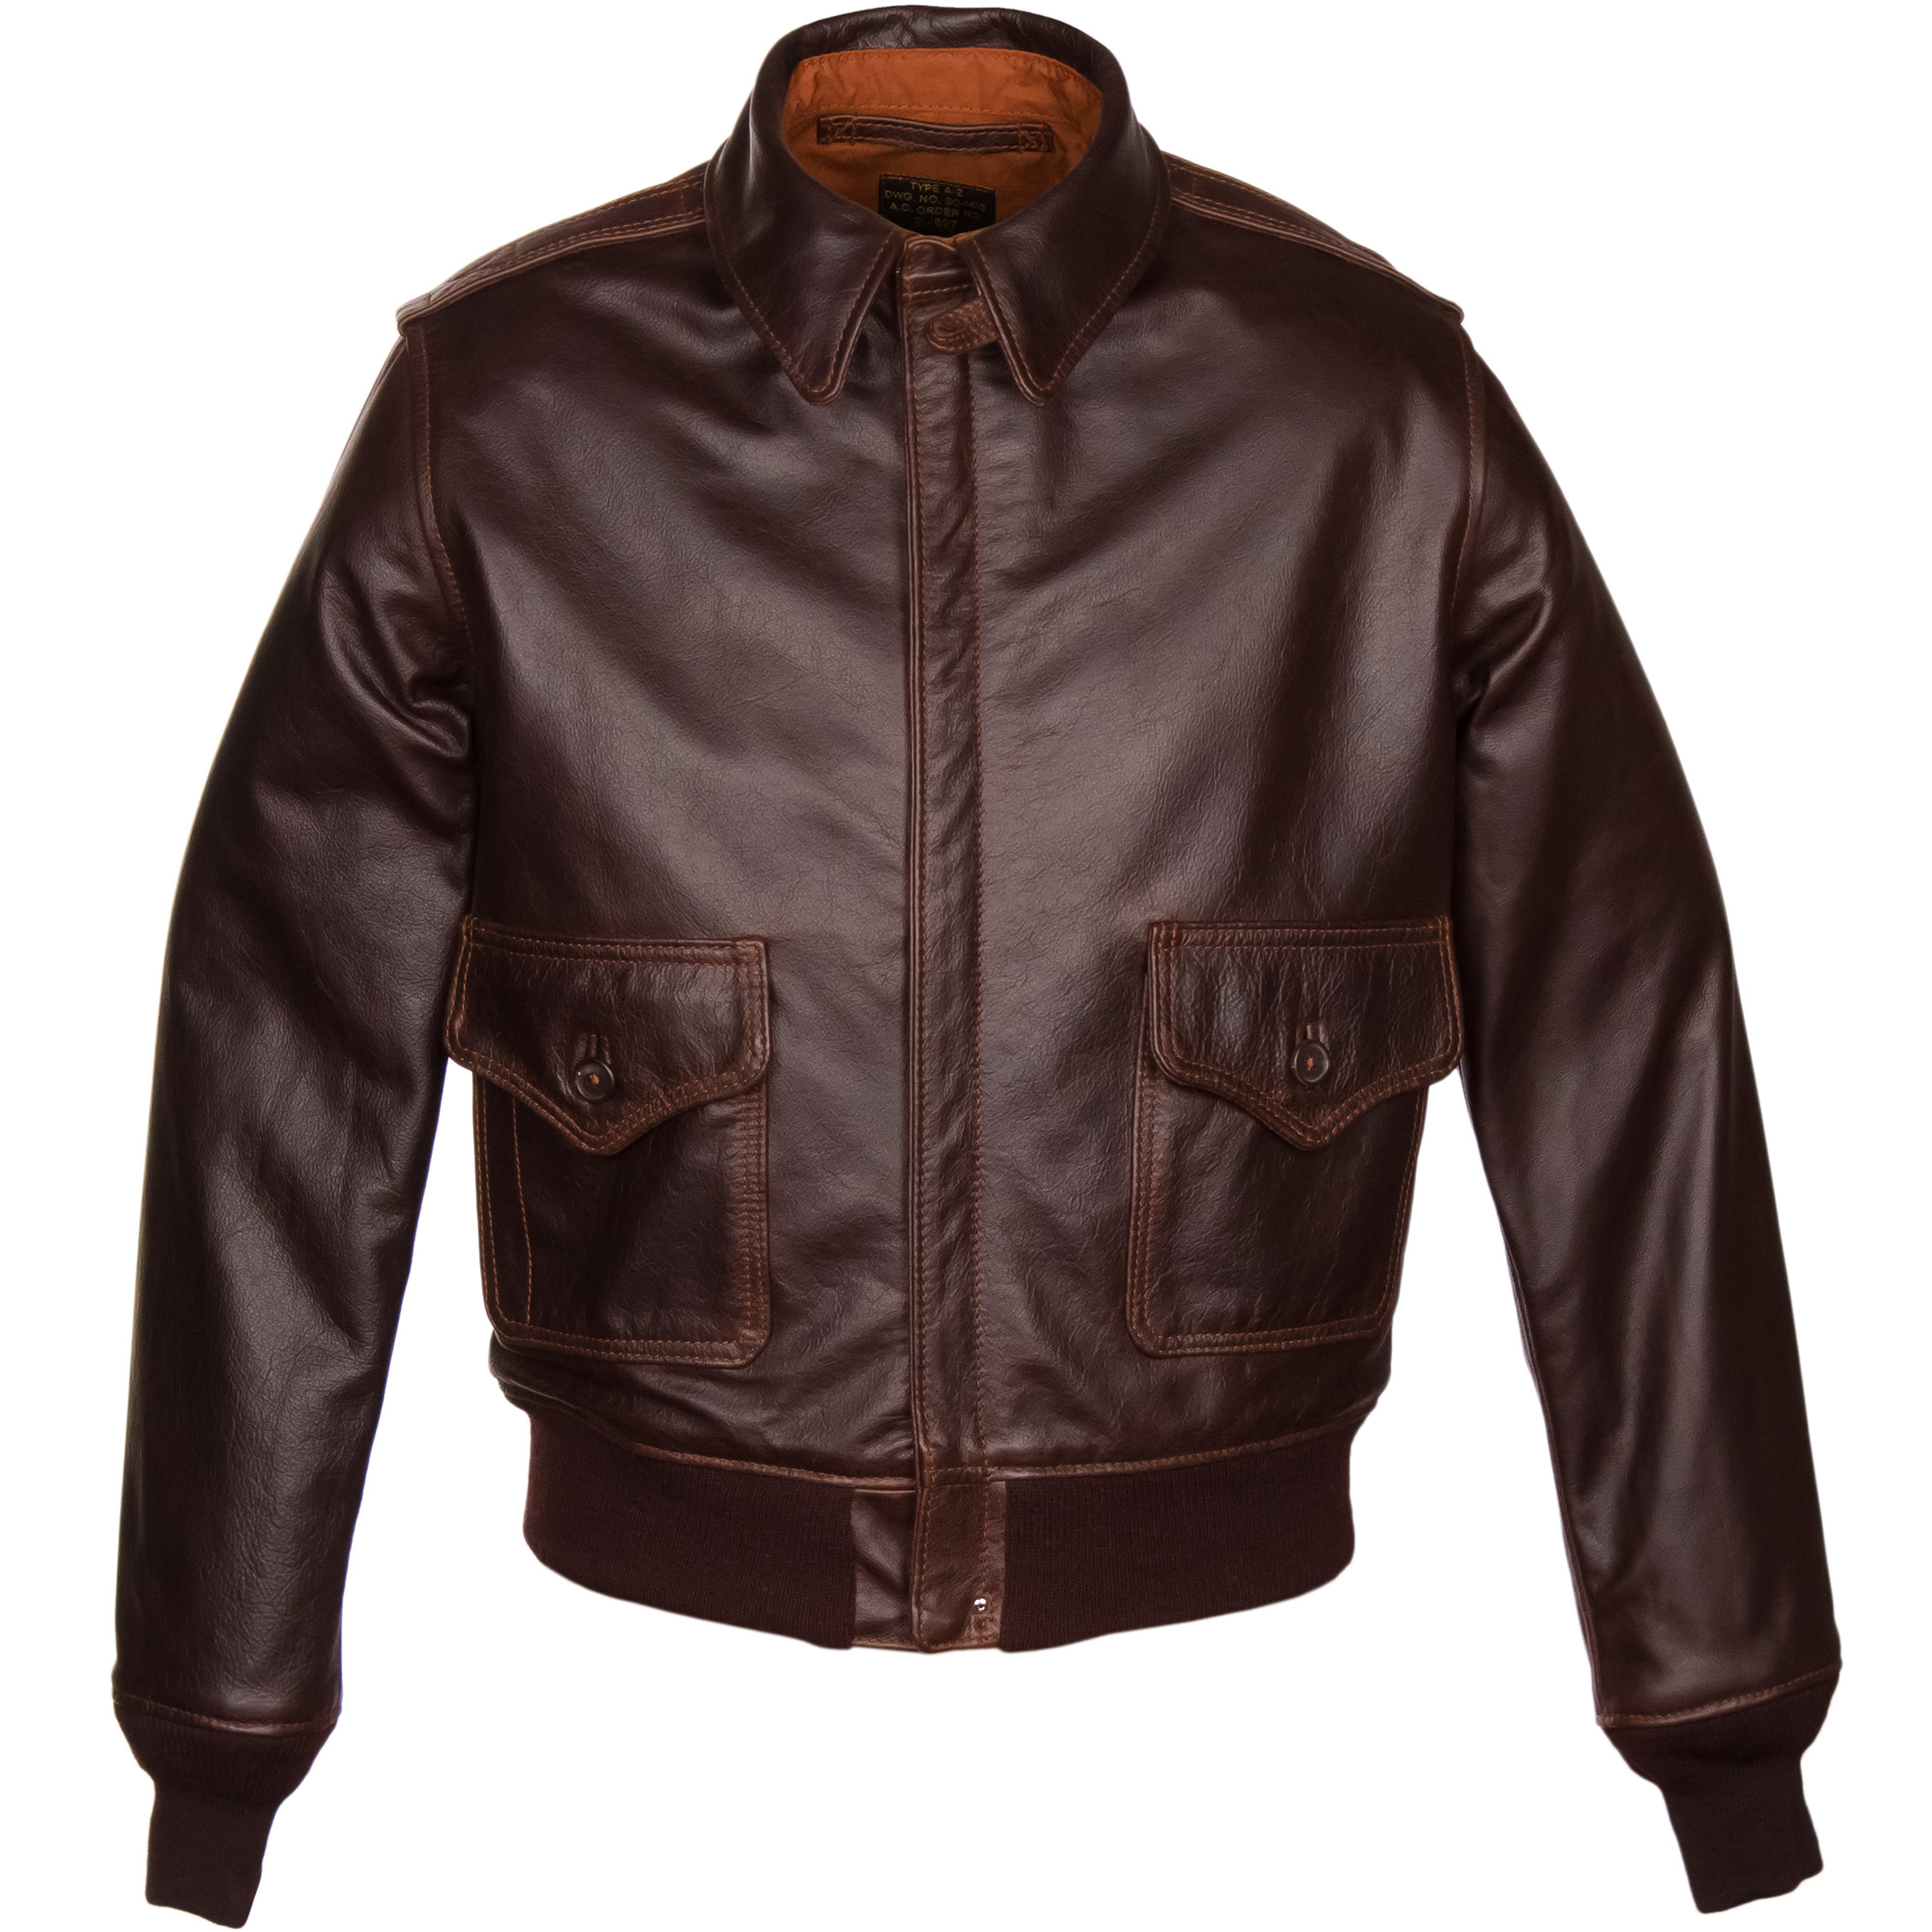 1931 GOLDSMITH A-2 Limited Edition of 25 | Vintage Leather Jackets Forum